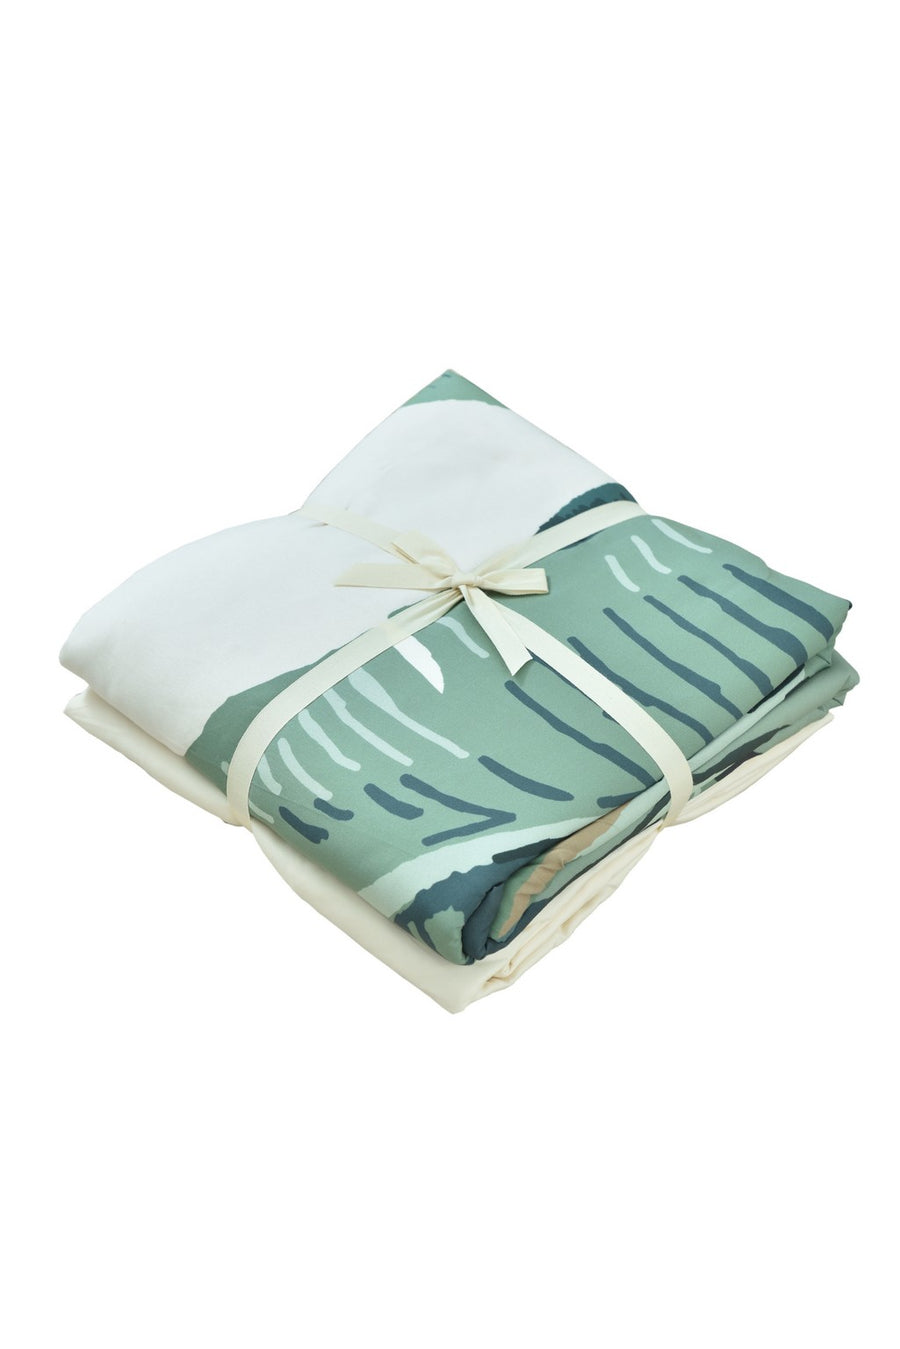 Tropical Dream SS 4-pc Quilt Cover Set (Green)